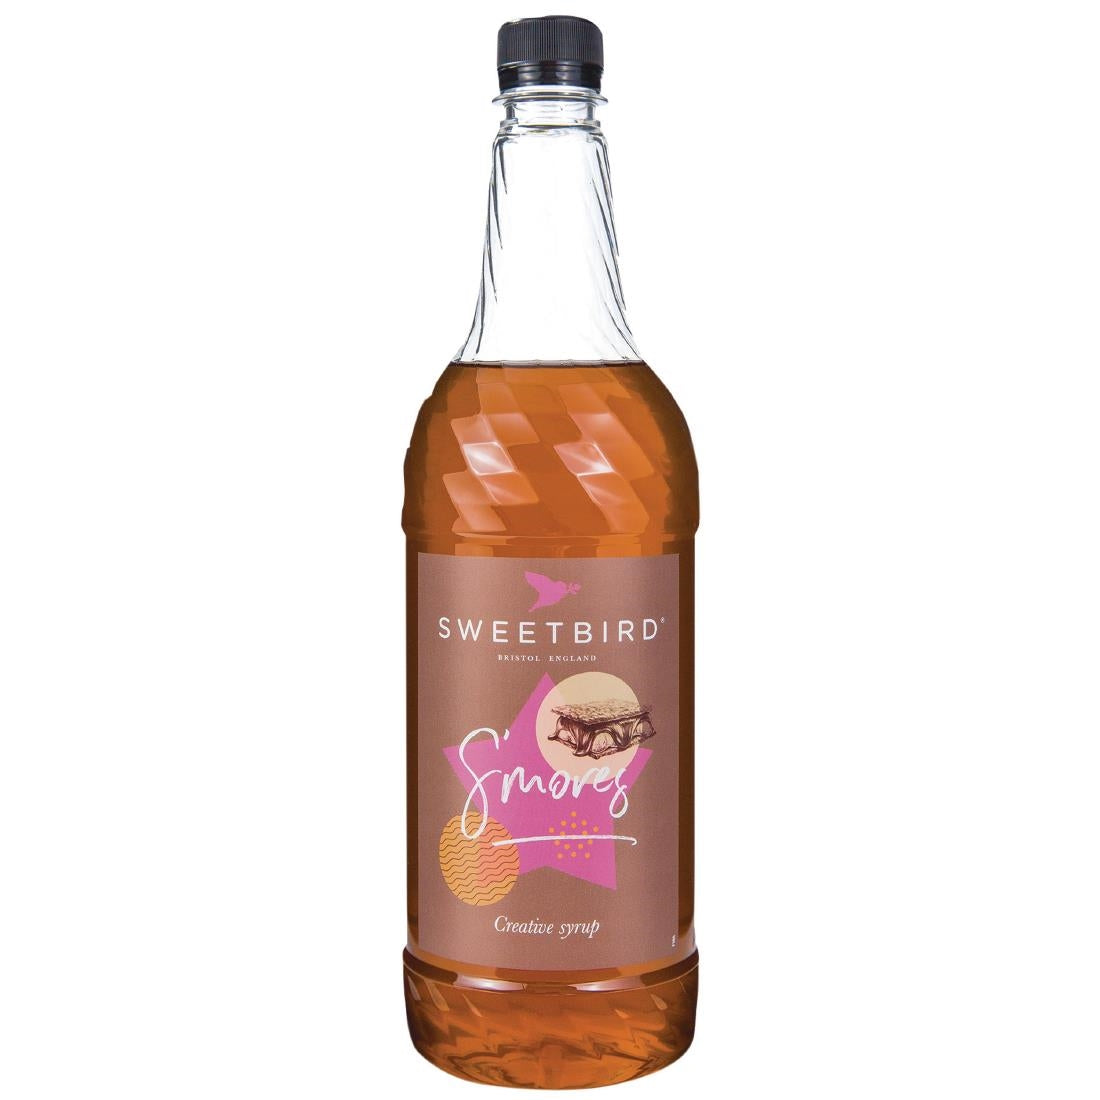 GP397 Sweetbird S'mores Syrup 1Ltr Bottle